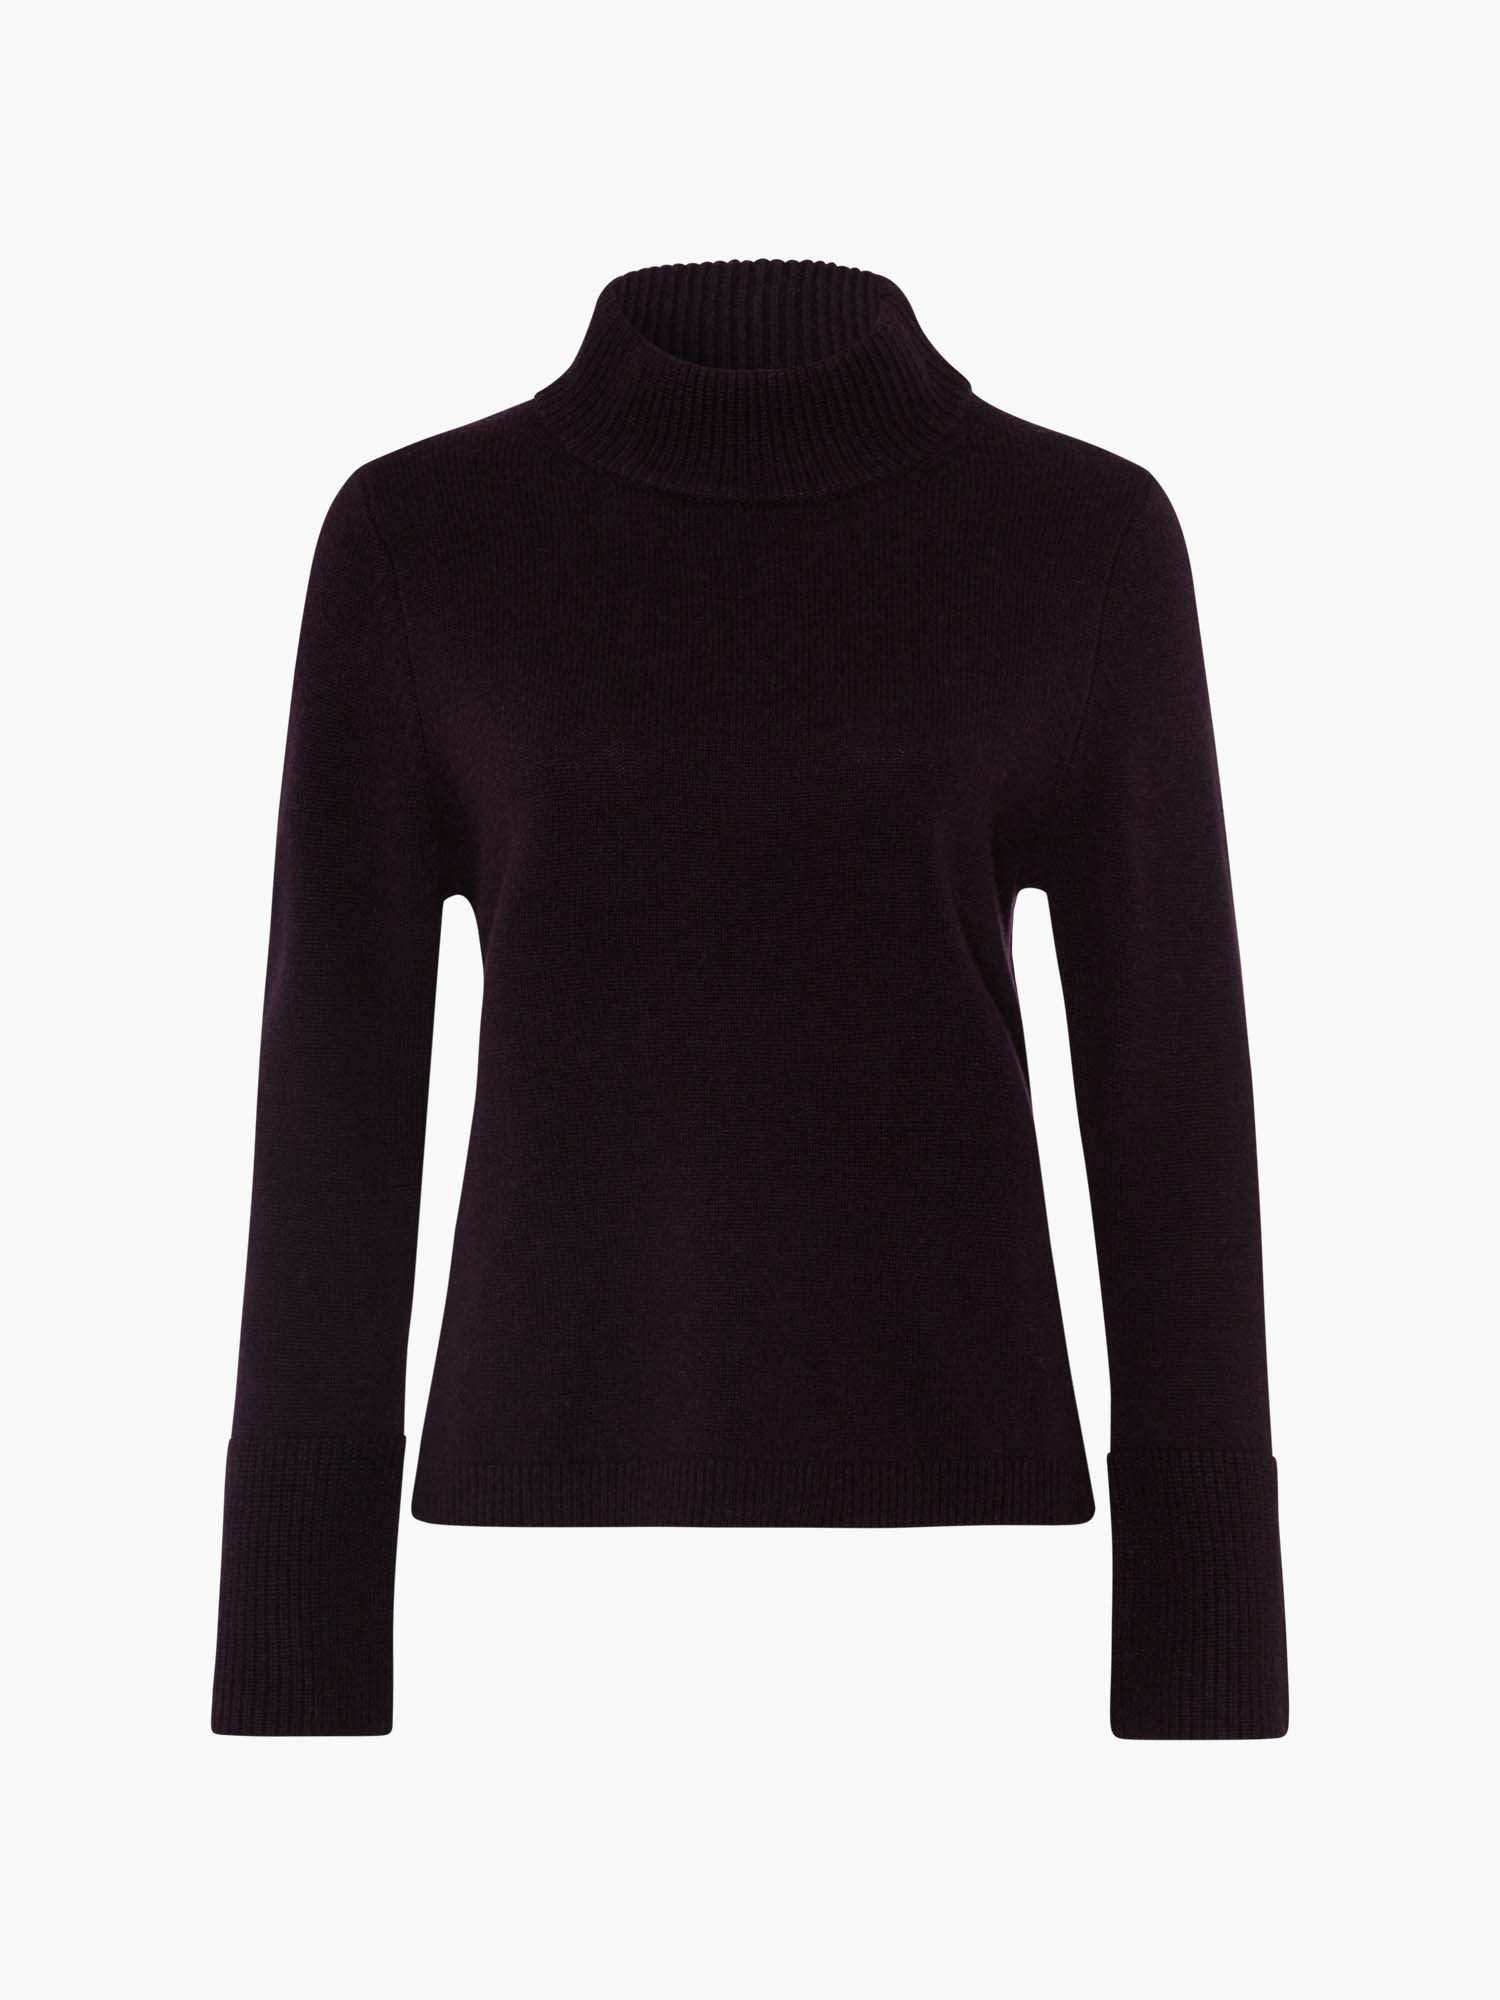 FTC-Cashmere-OUTLET-SALE-Pullover-Mockneck-Strick-ARCHIVE-COLLECTION_4c980cfd-afac-4bf6-a684-8afa35729786.jpg